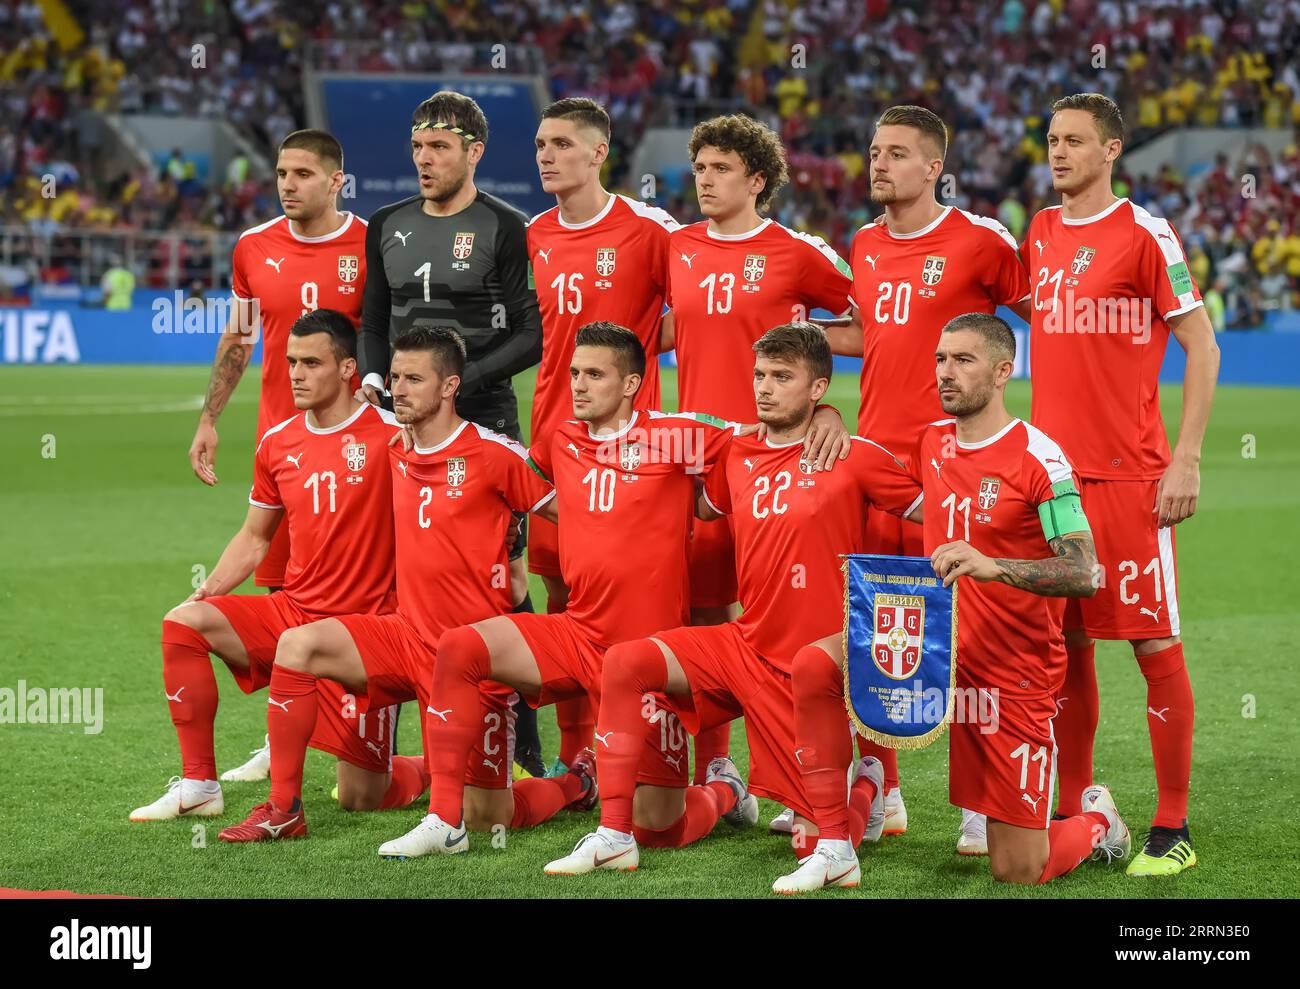 Moscow, Russia - June 27, 2018. Team photo of Serbia national football team before FIFA World Cup 2018 match Serbia vs Brazil (0-2) Stock Photo